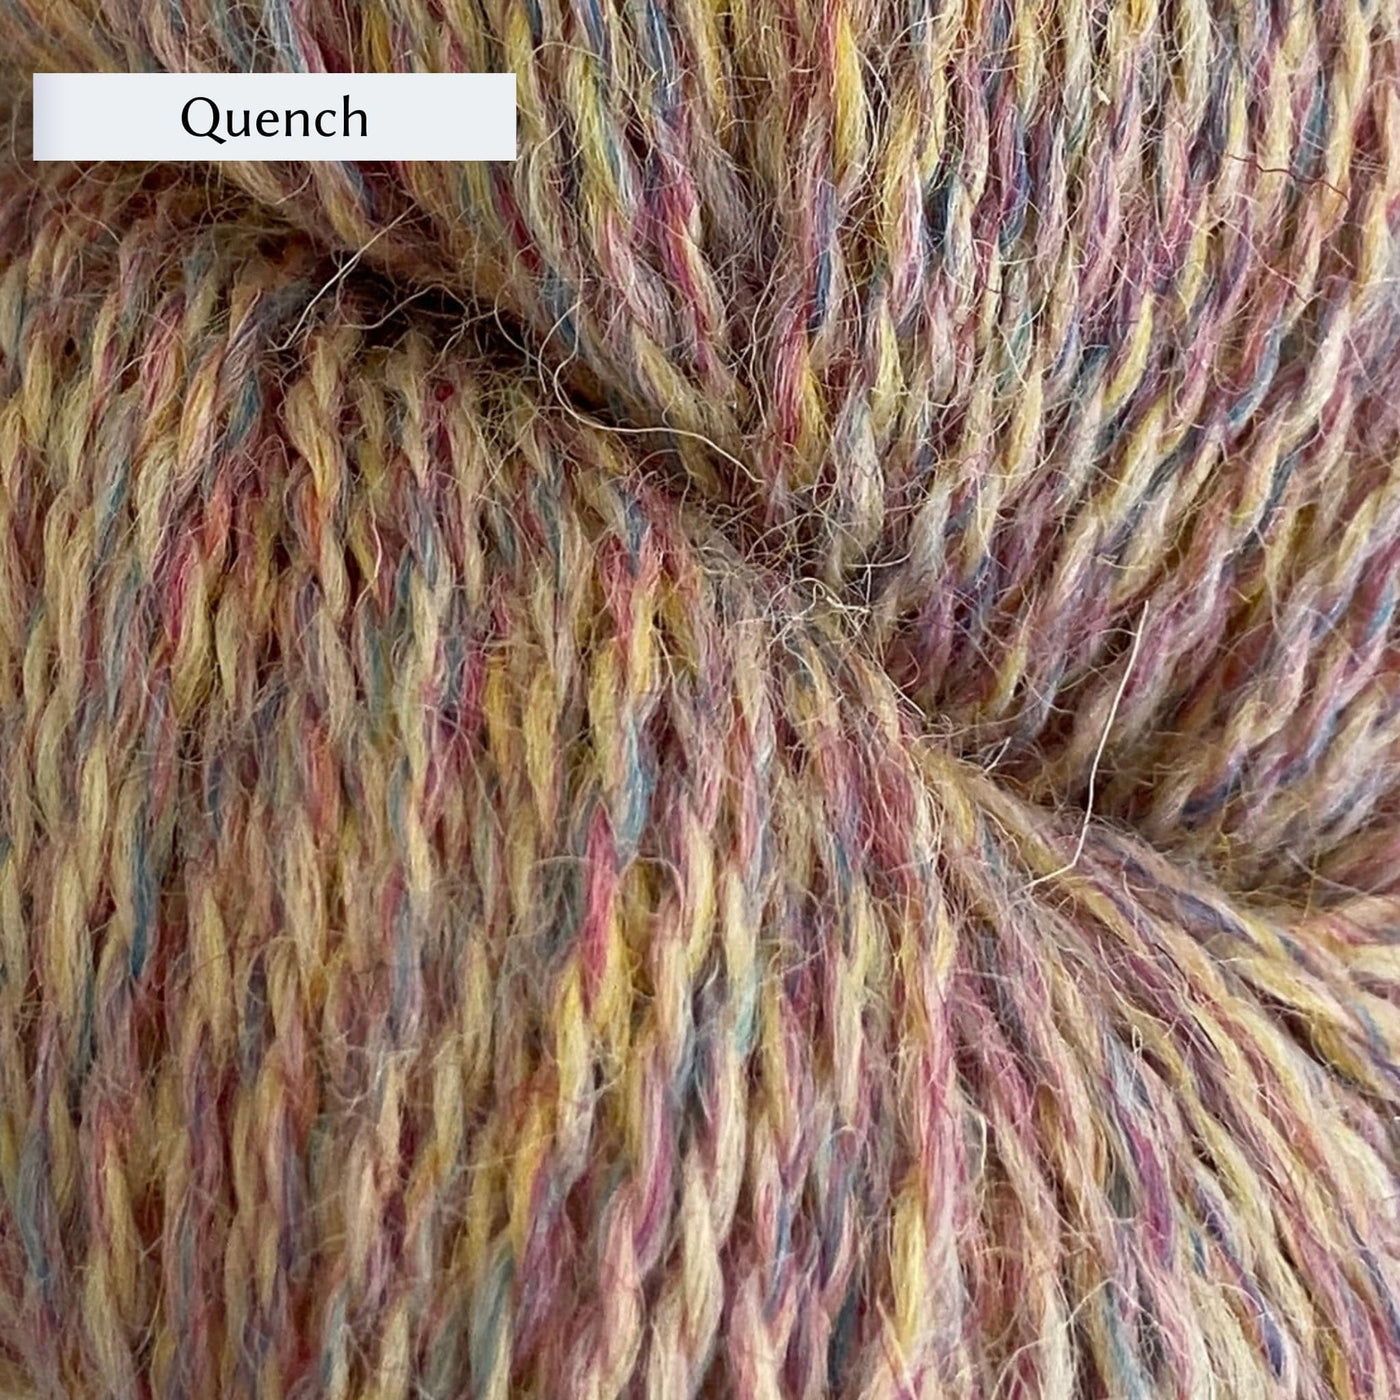 John Arbon Appledore DK, a DK weight British yarn, in color Quench, a warm pink with yellow and burgundy heathering